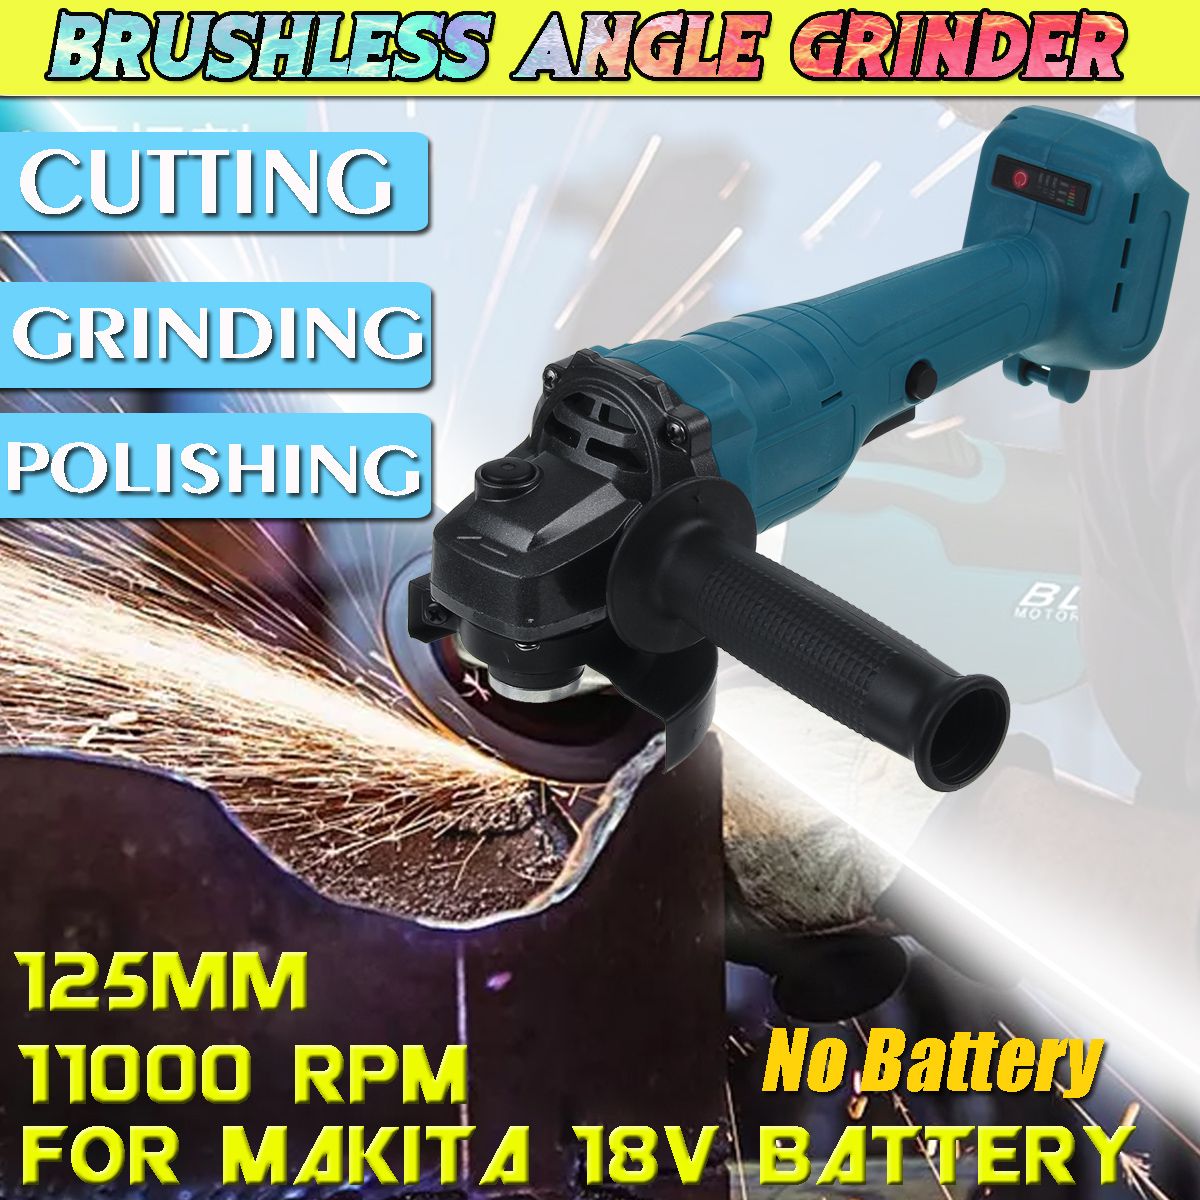 8500RPM-125mm-Cordless-Brushless-Electric-Angle-Grinder-For-Makita-18V-Battery-1740323